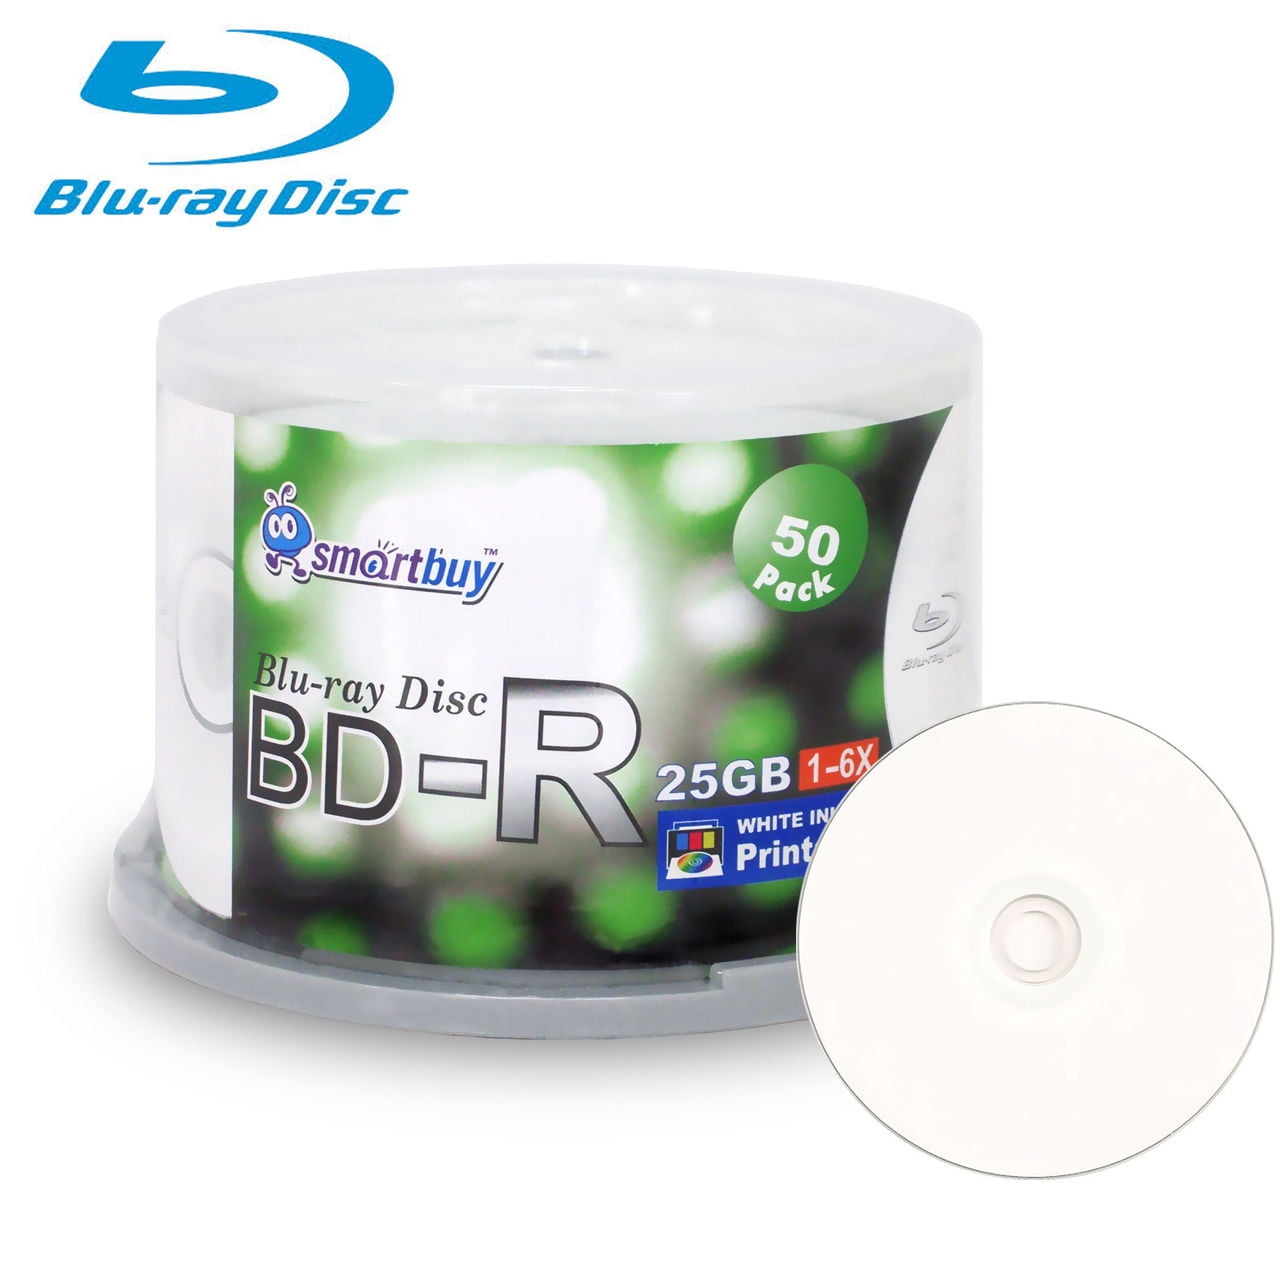 Smartbuy 50 Pack Bd-r 25gb 6x Blu-ray Single Layer Recordable Disc  Printable White Inkjet Blank Data Video Media 50 Disc Spindle